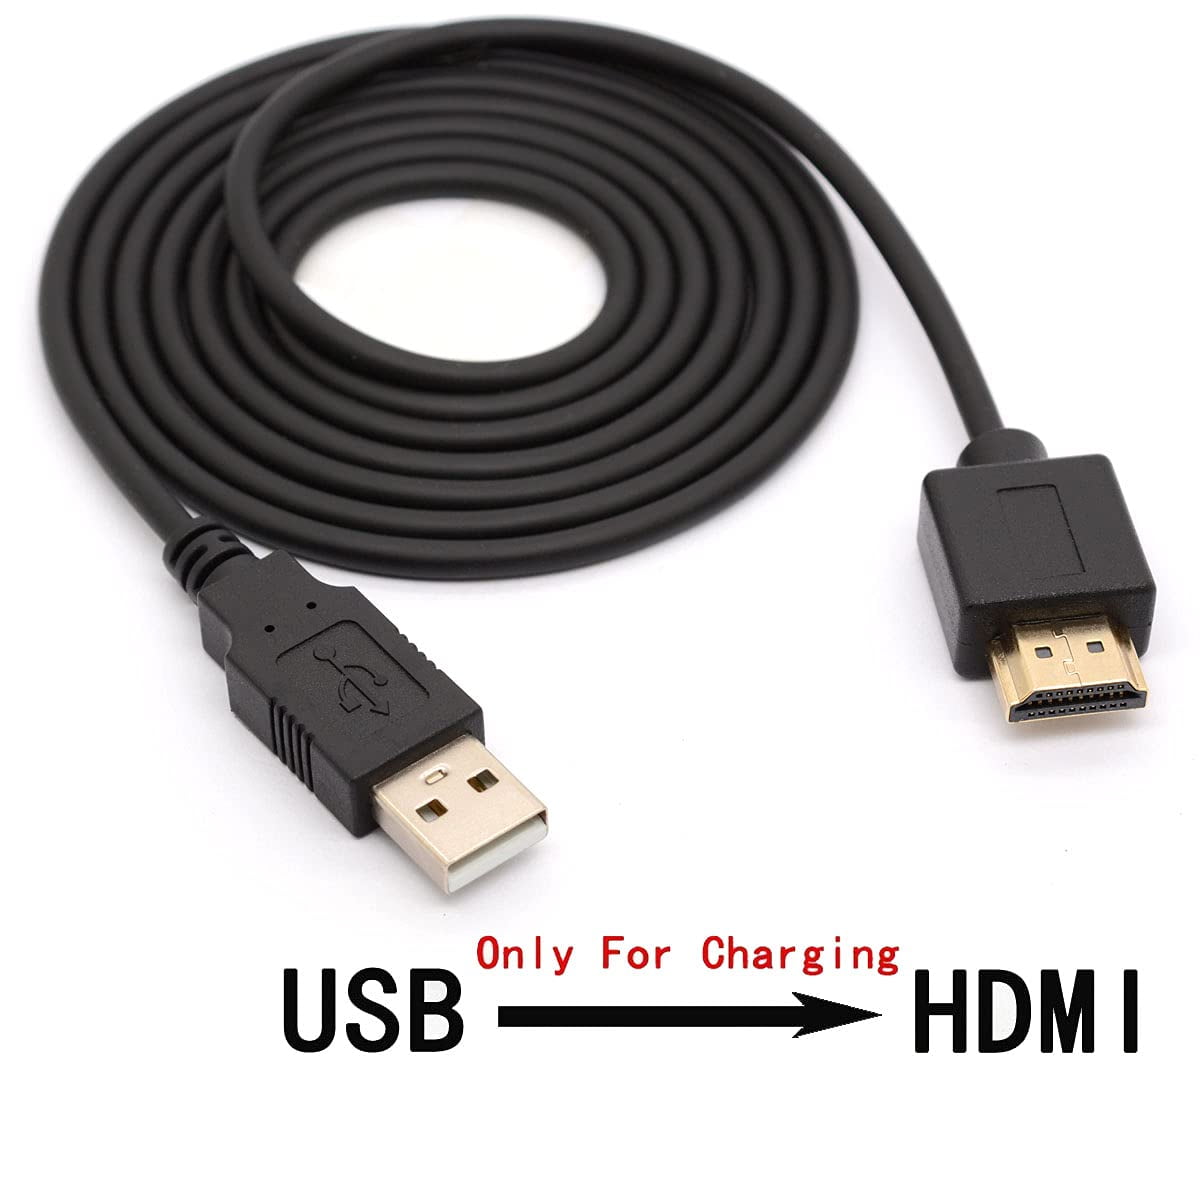 Ja øve sig Alternativt forslag USB to HDMI Adapter Cable Cord - USB 2.0 Type A Male to HDMI Male Charging  Converter (Only for Charging) (1.5 Meter) - Walmart.com